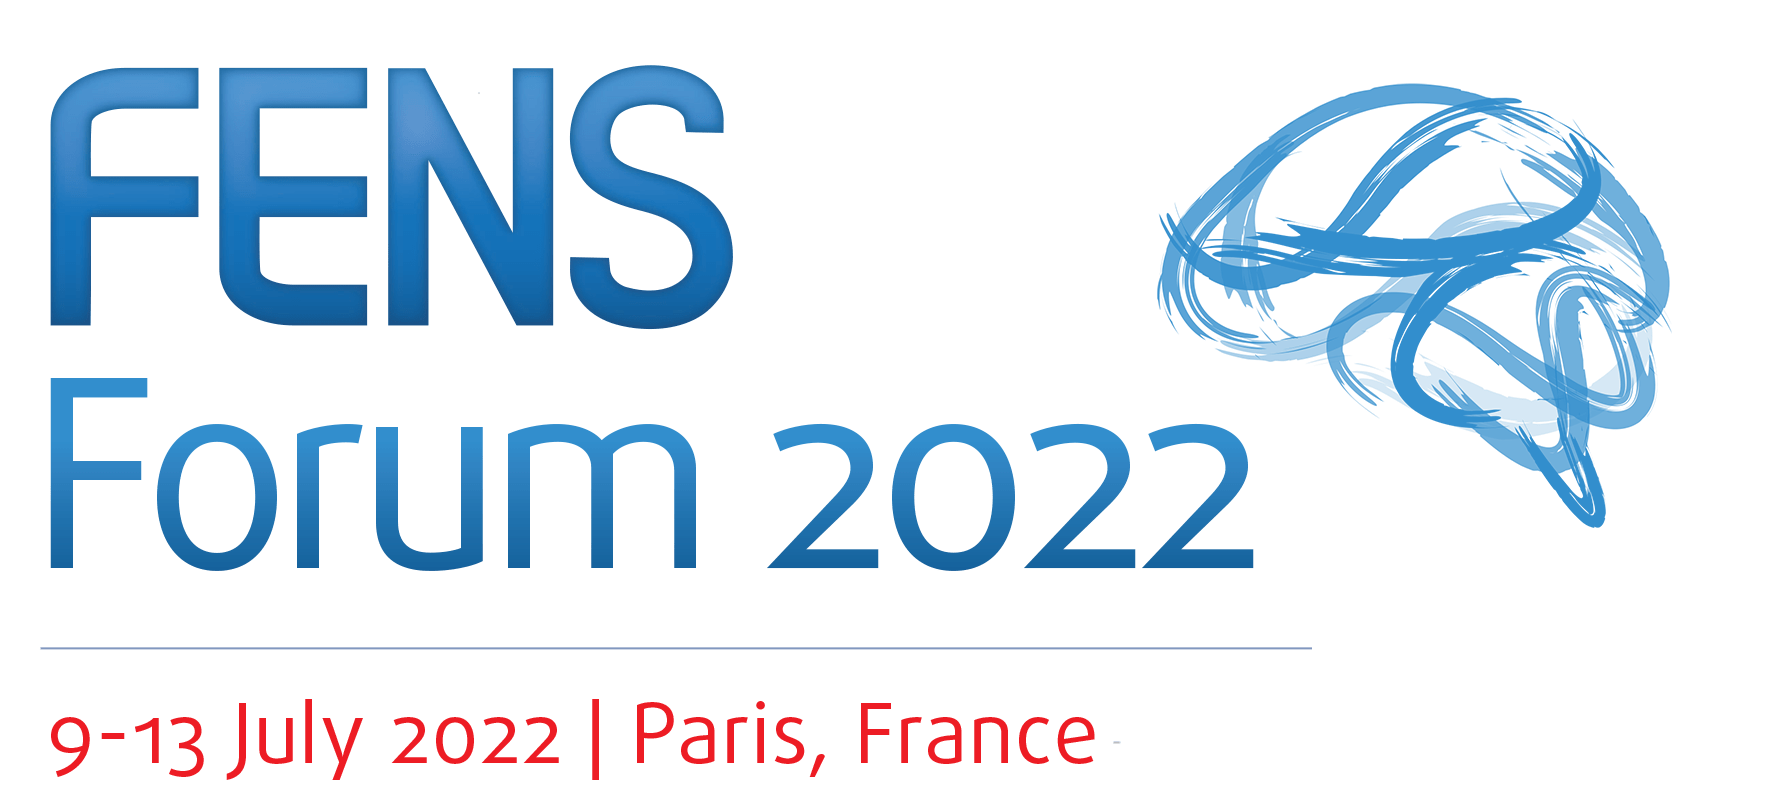 Forum 2022 Committees - FENS 2022 - International Neuroscience Conference